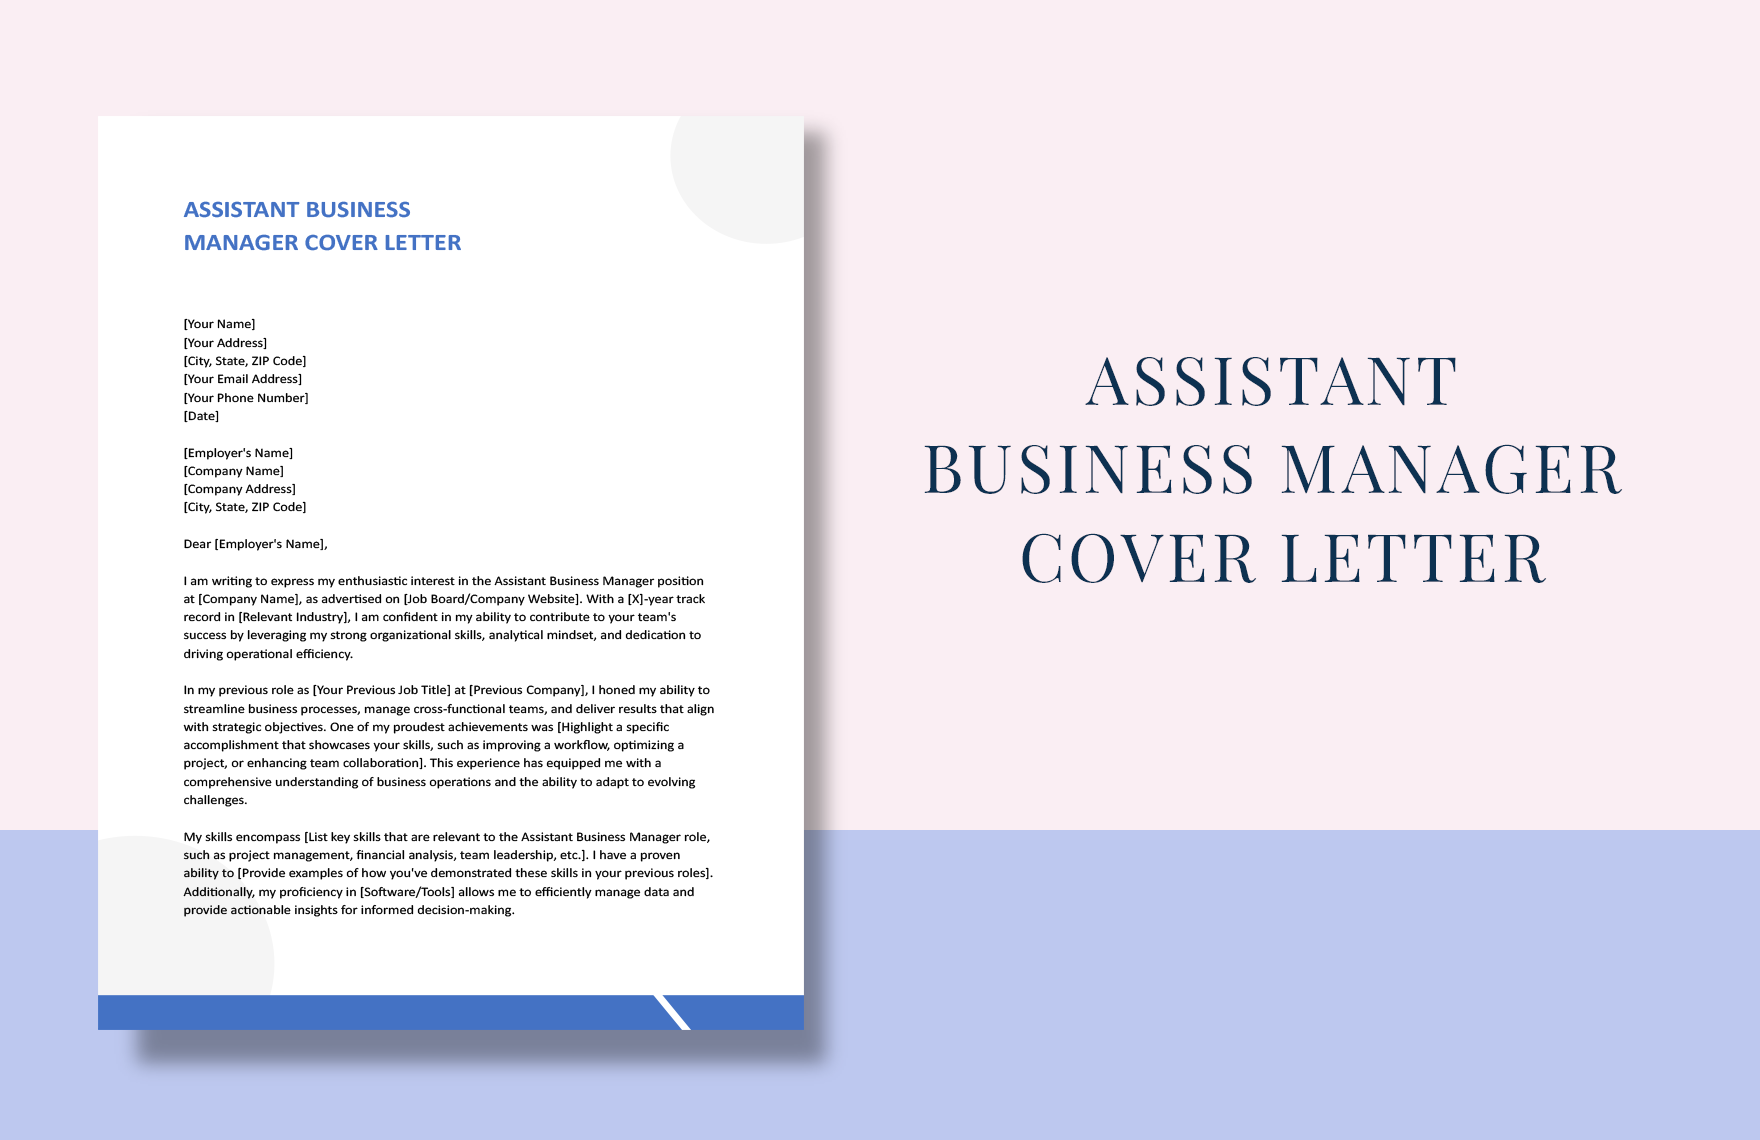 Assistant Business Manager Cover Letter